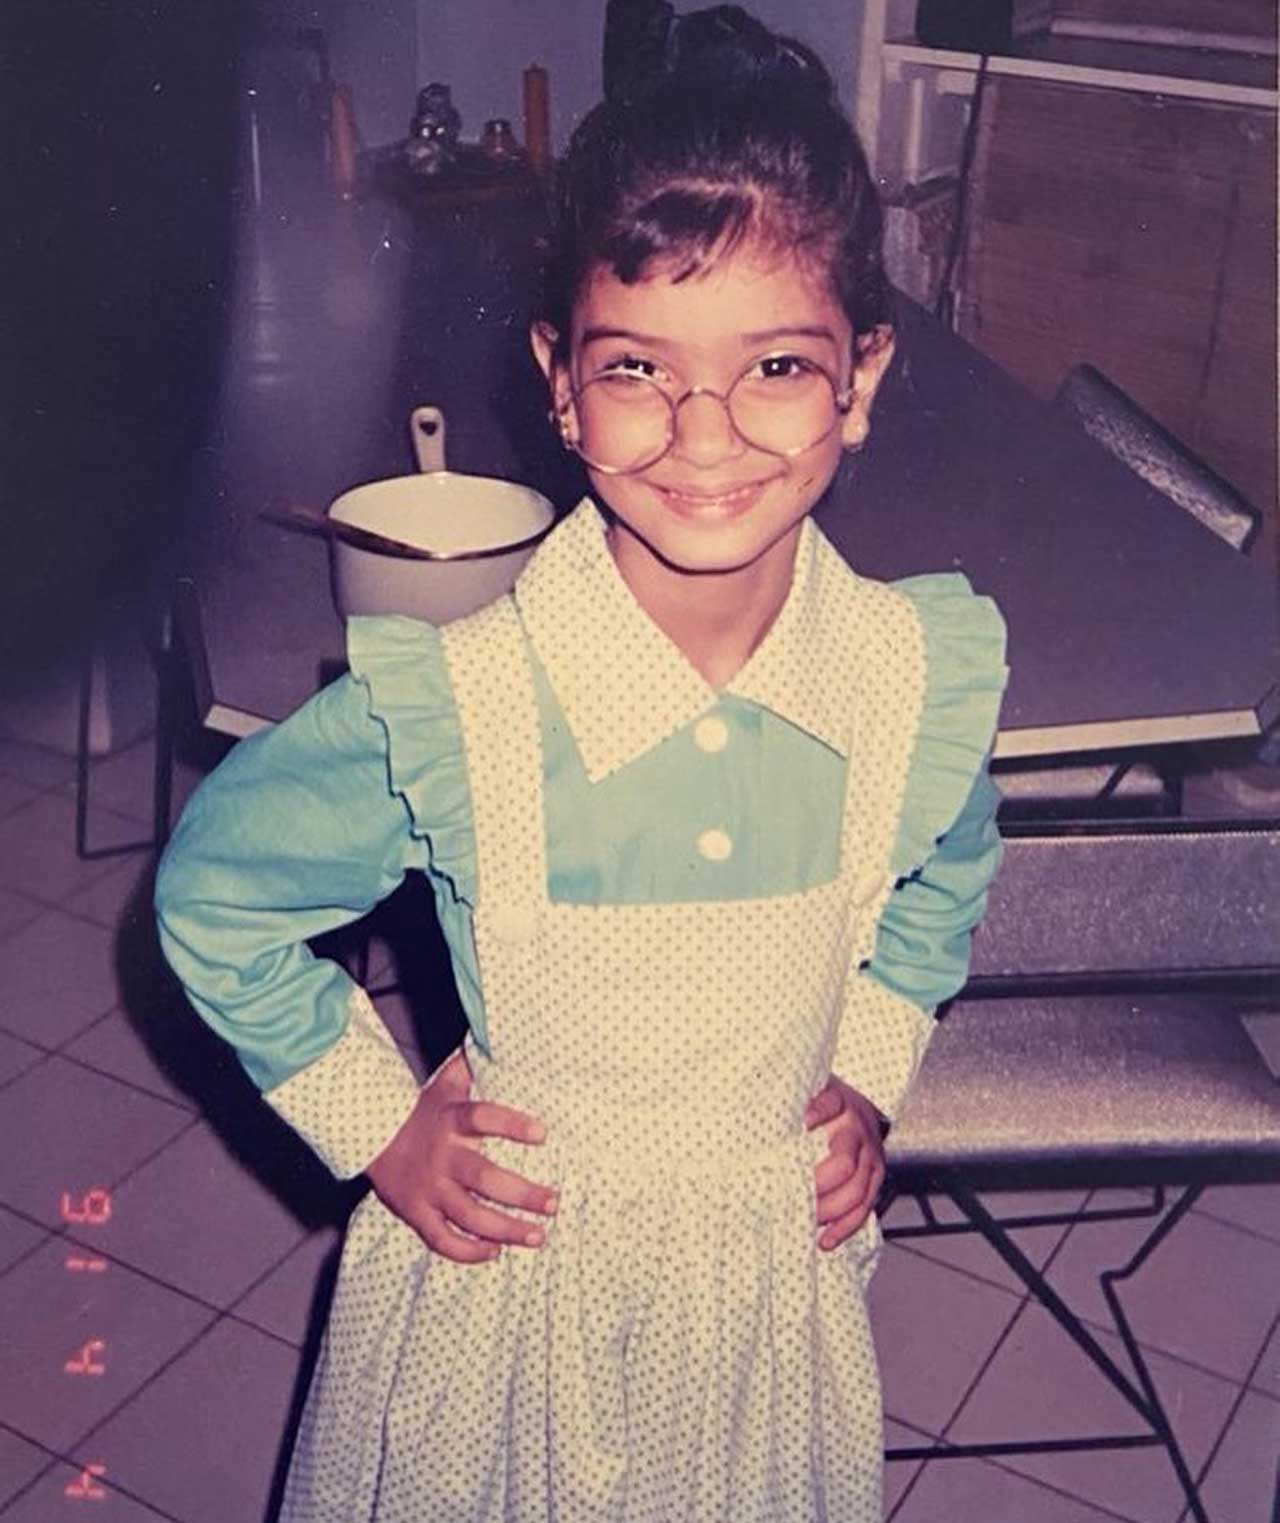 Diana Penty shared a super cute, nerdy picture of her childhood days, in which she can be seen dressed in a blue and white dress with frills and polka dots. 